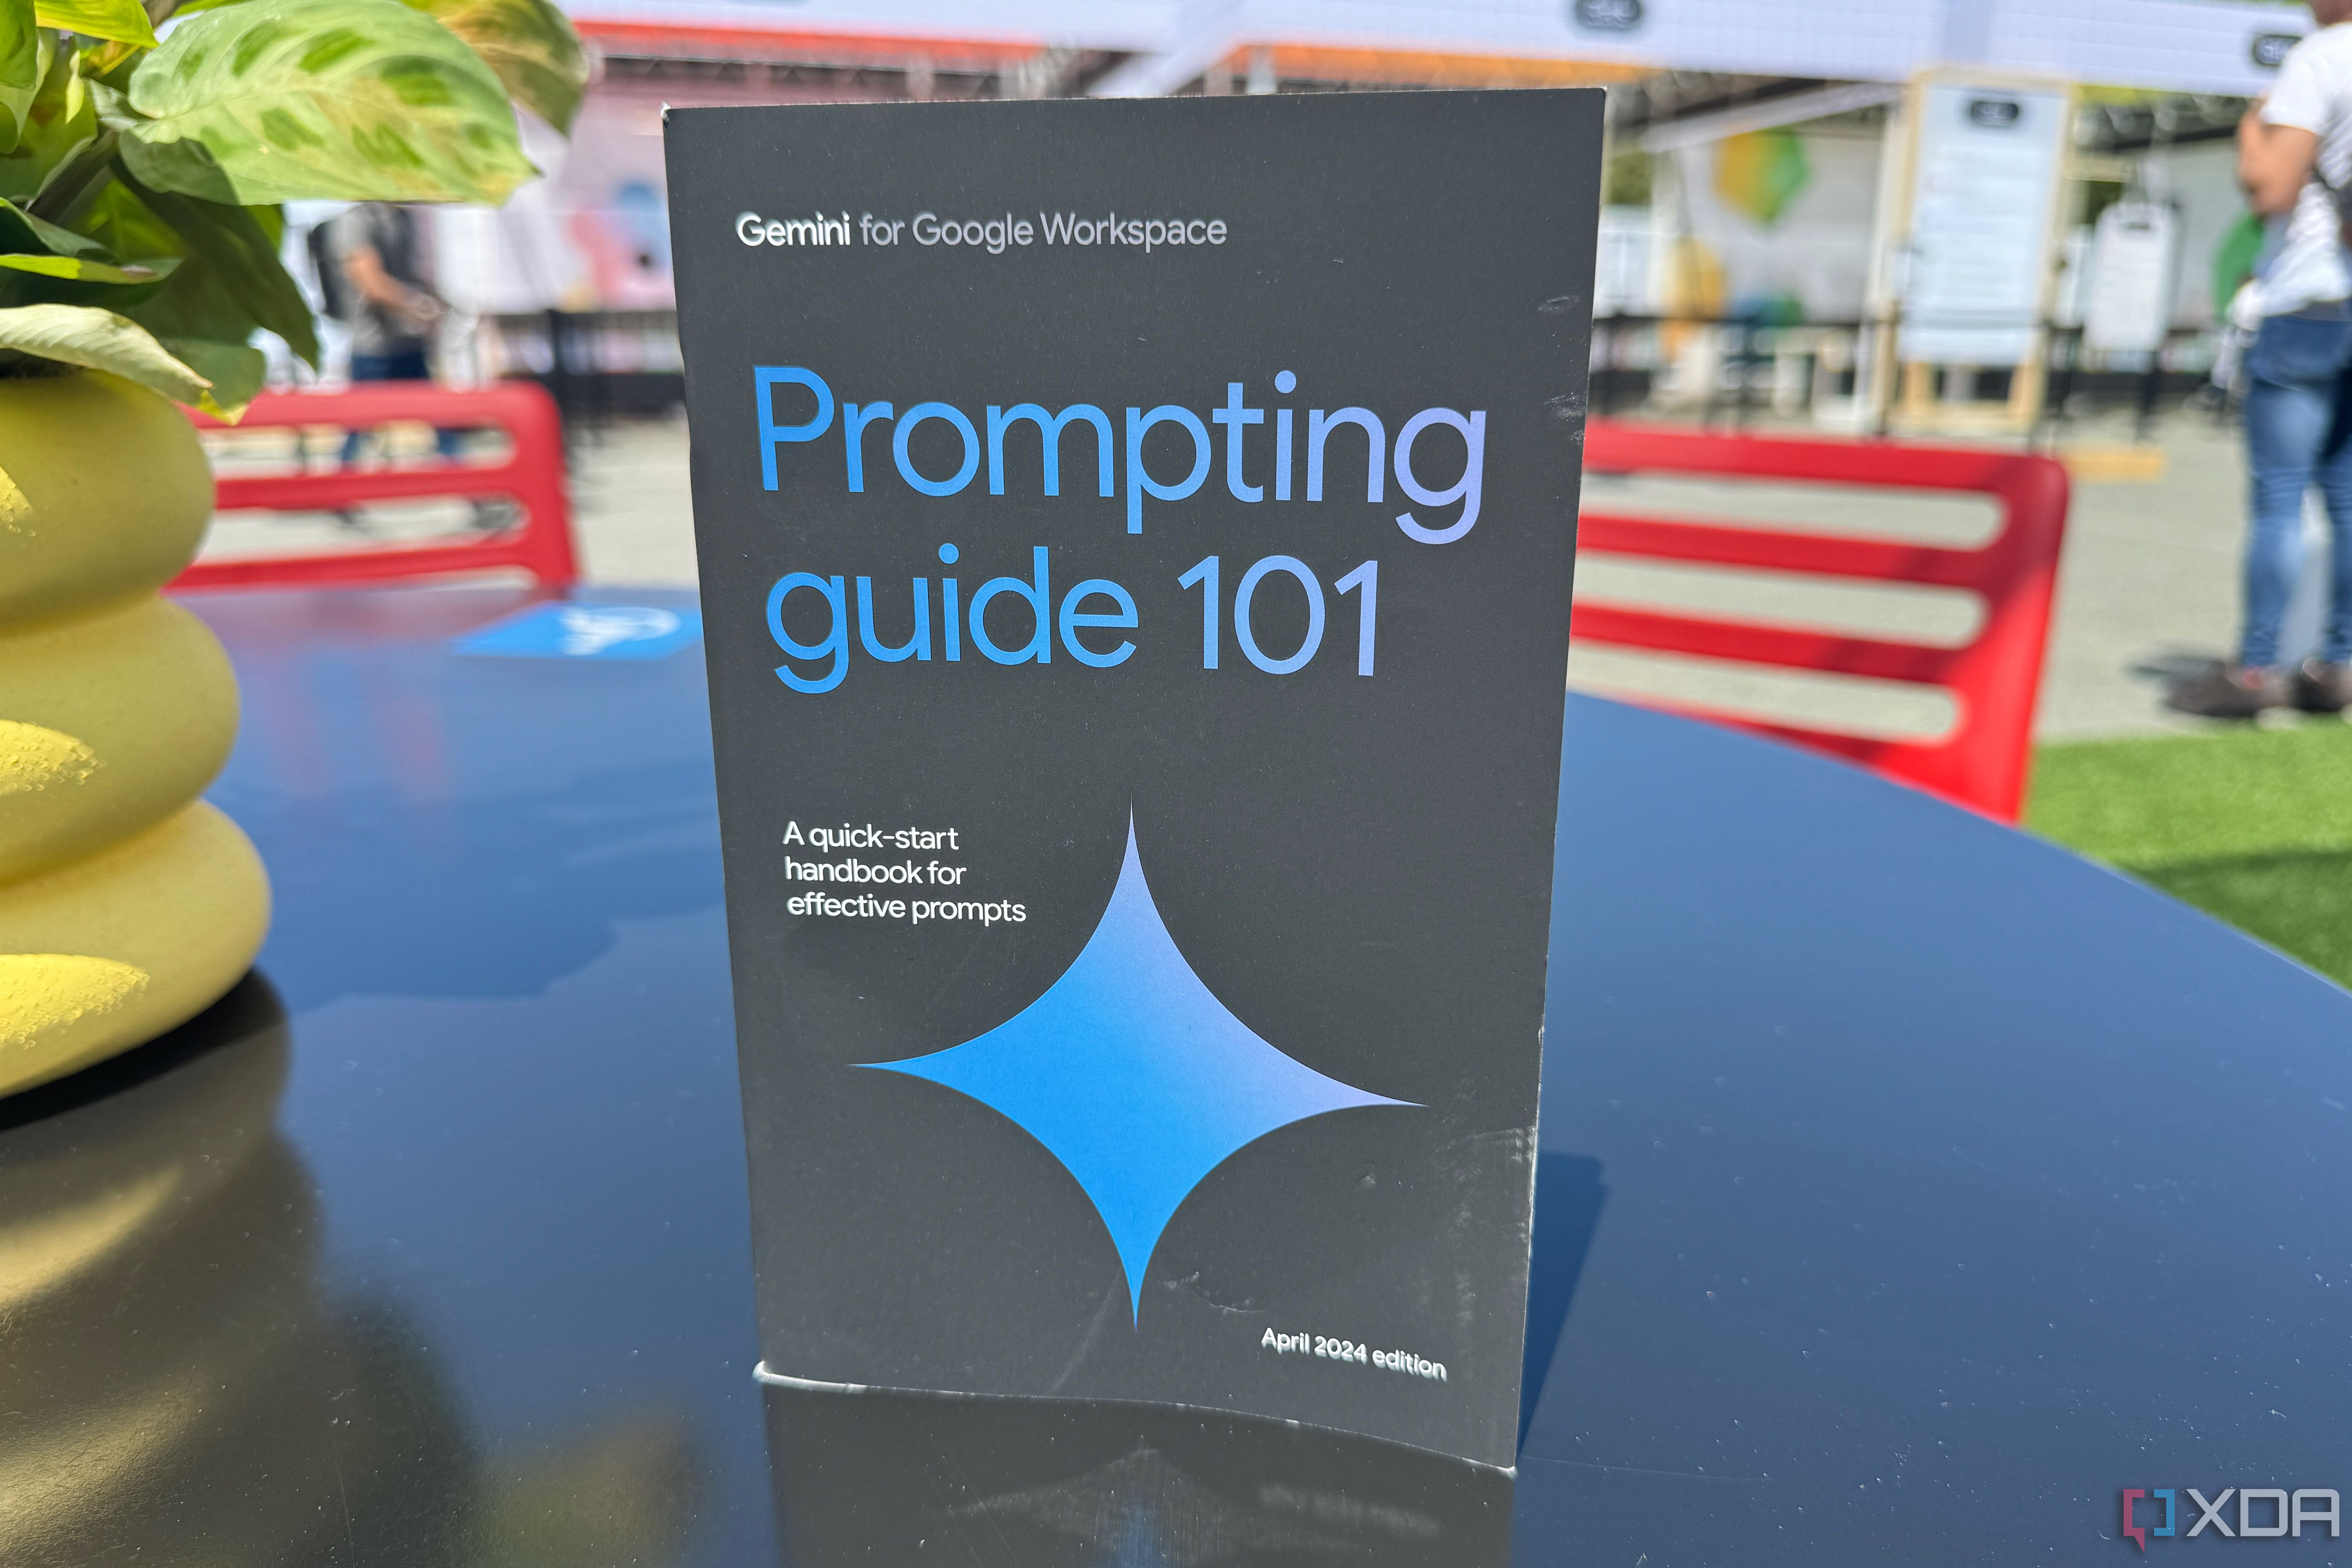 The physical Gemini prompting guide given to Google I/O guests.